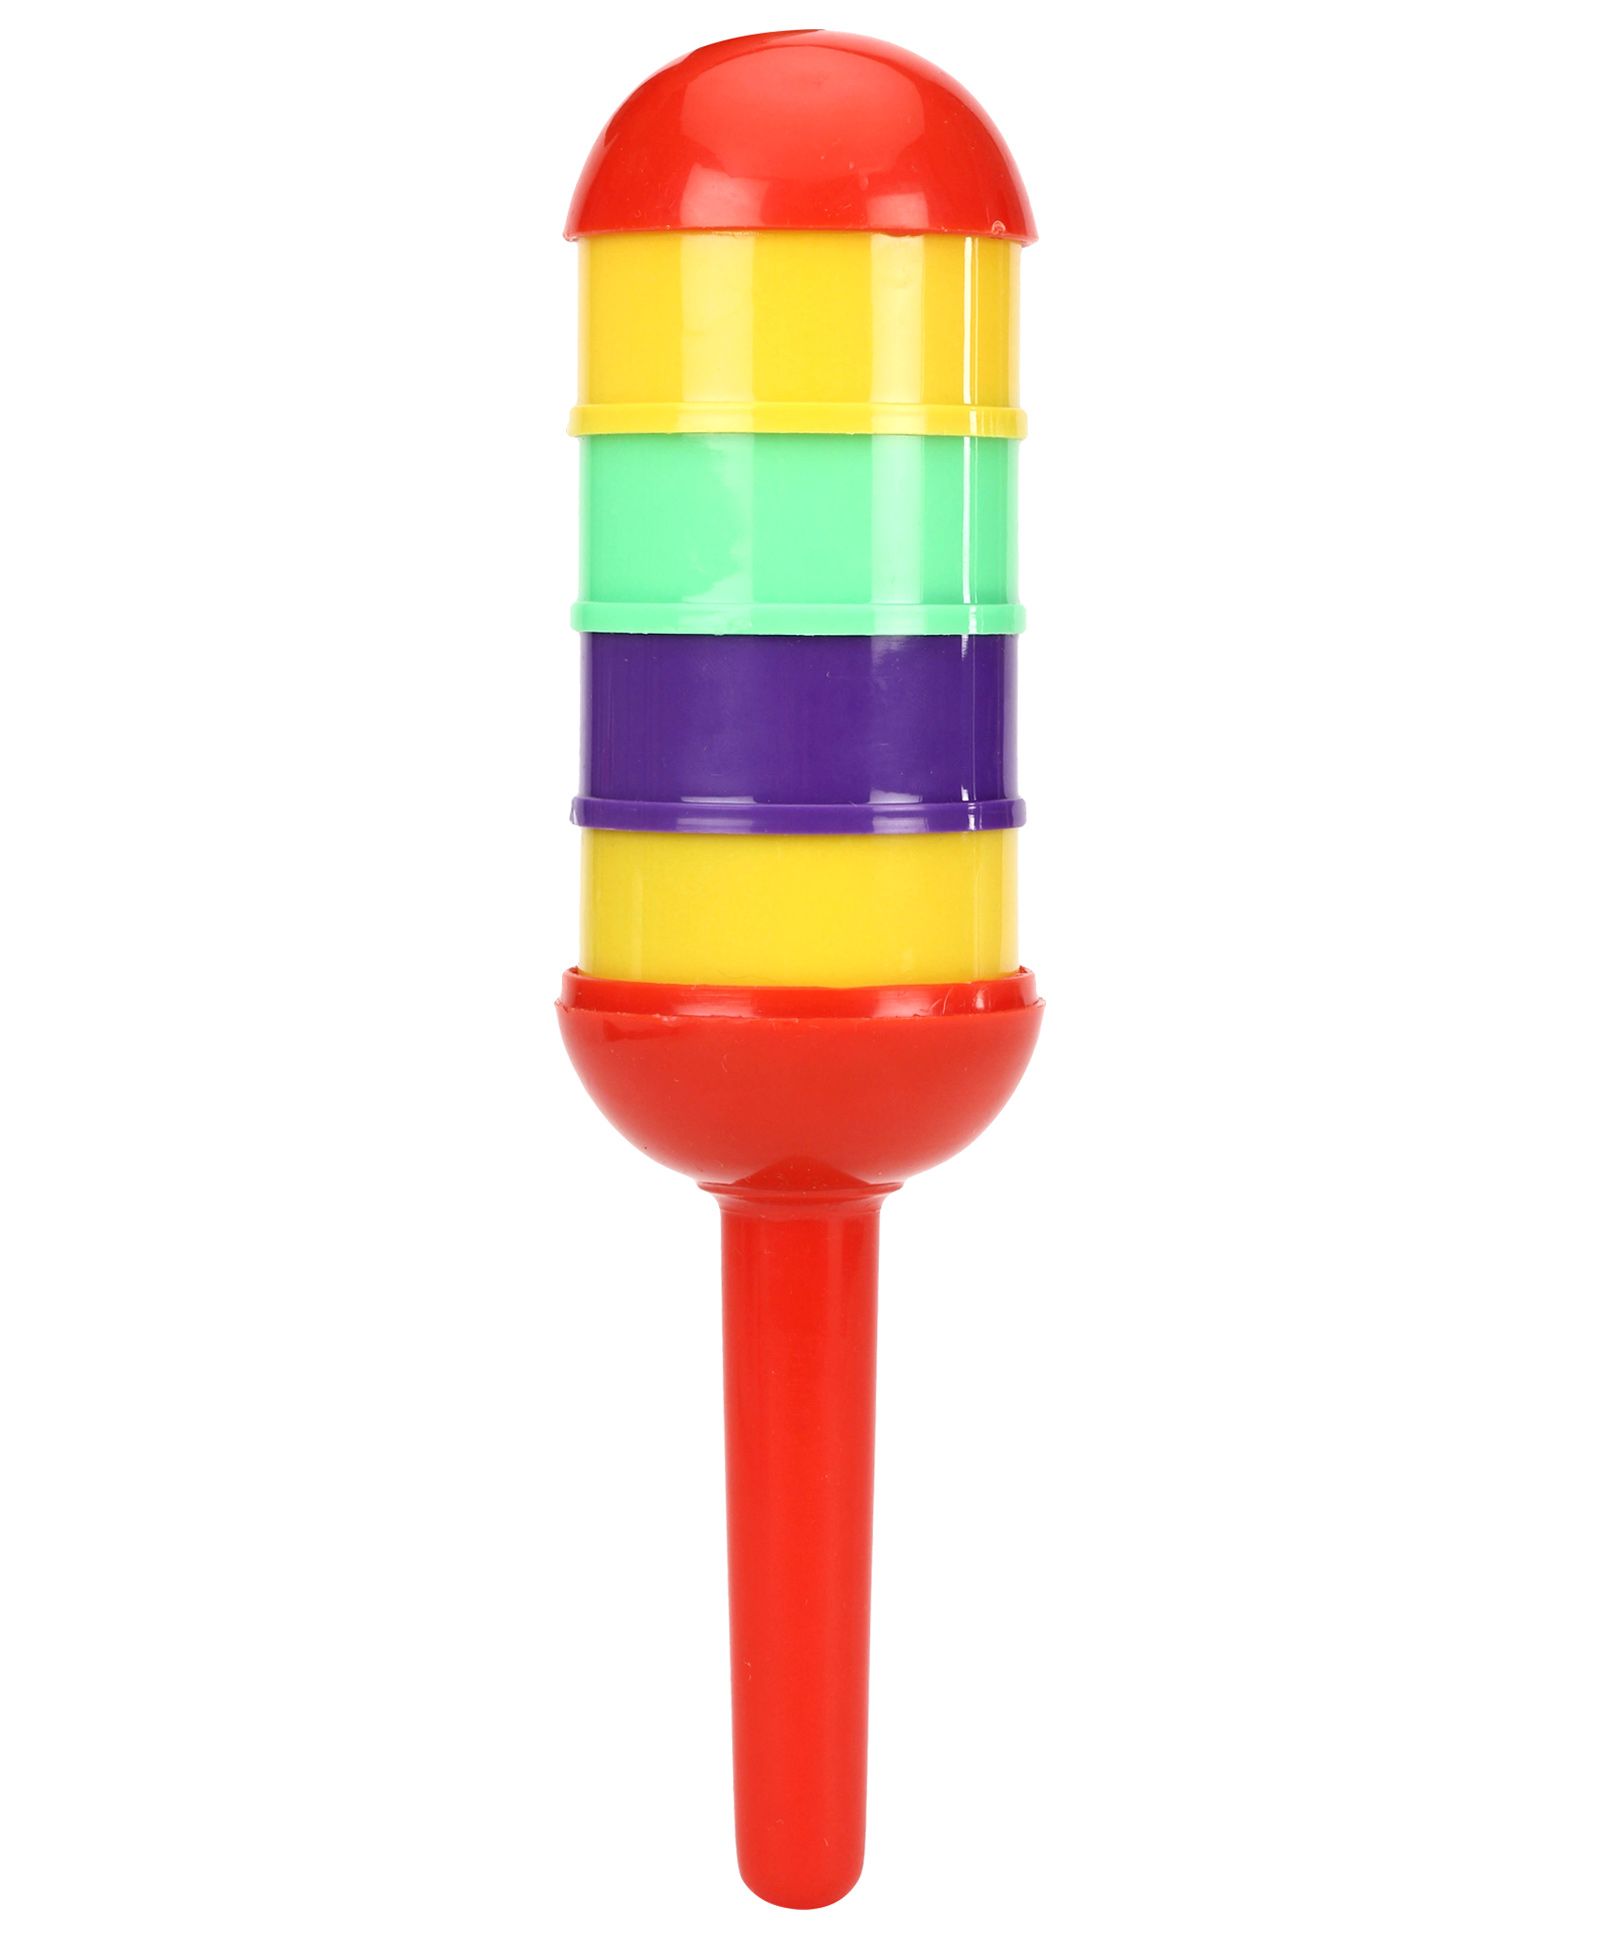 Little Chime Junior Rattle for Kids Play Toy Game